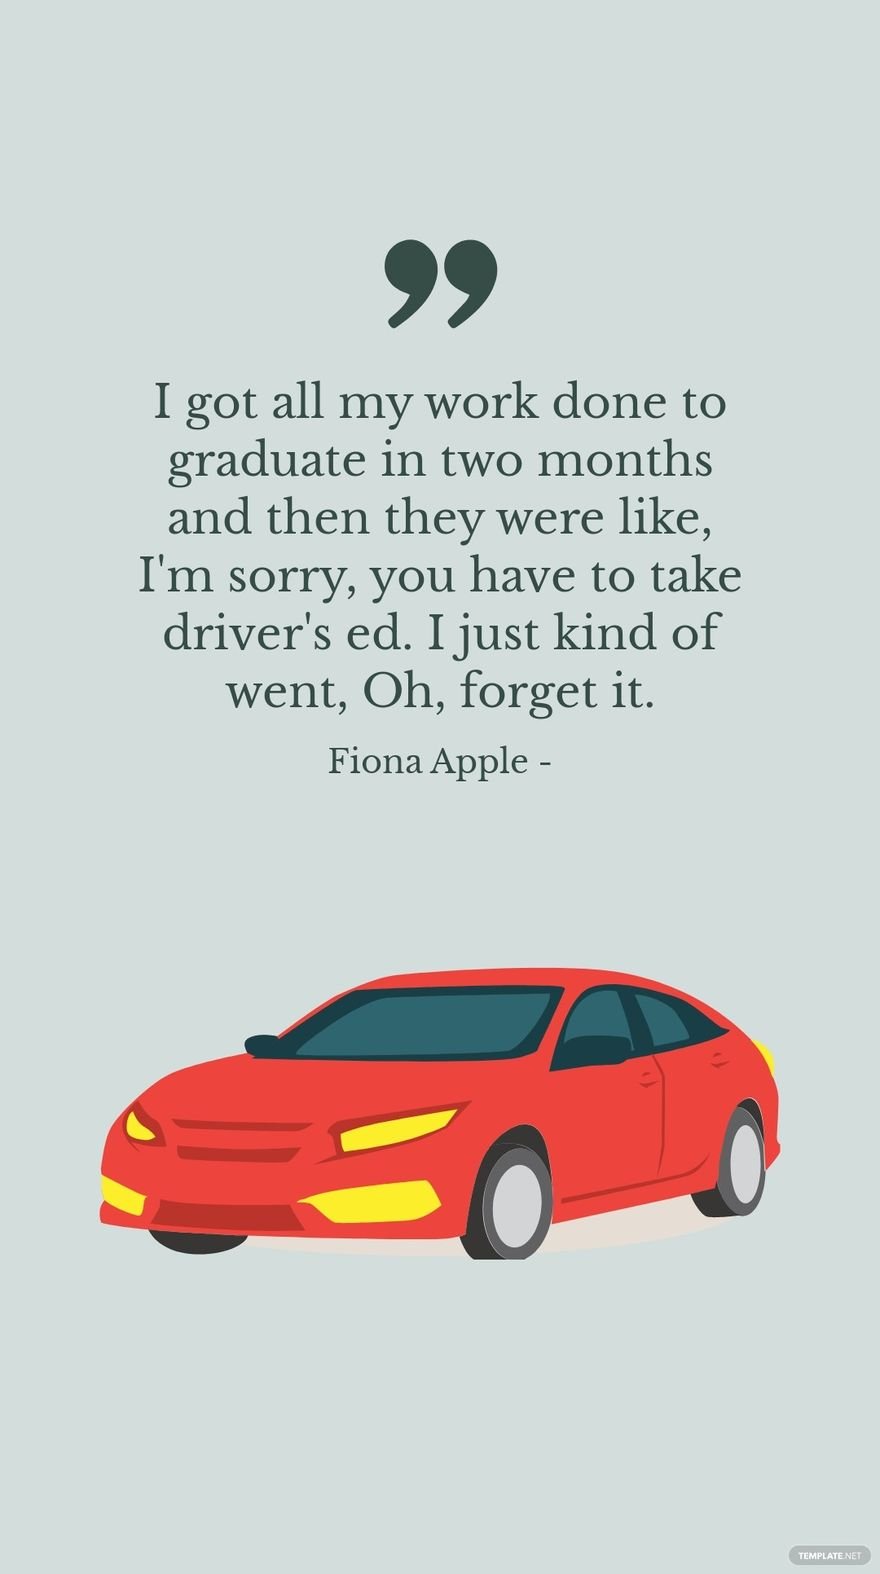 Fiona Apple - I got all my work done to graduate in two months and then they were like, I'm sorry, you have to take driver's ed. I just kind of went, Oh, forget it.